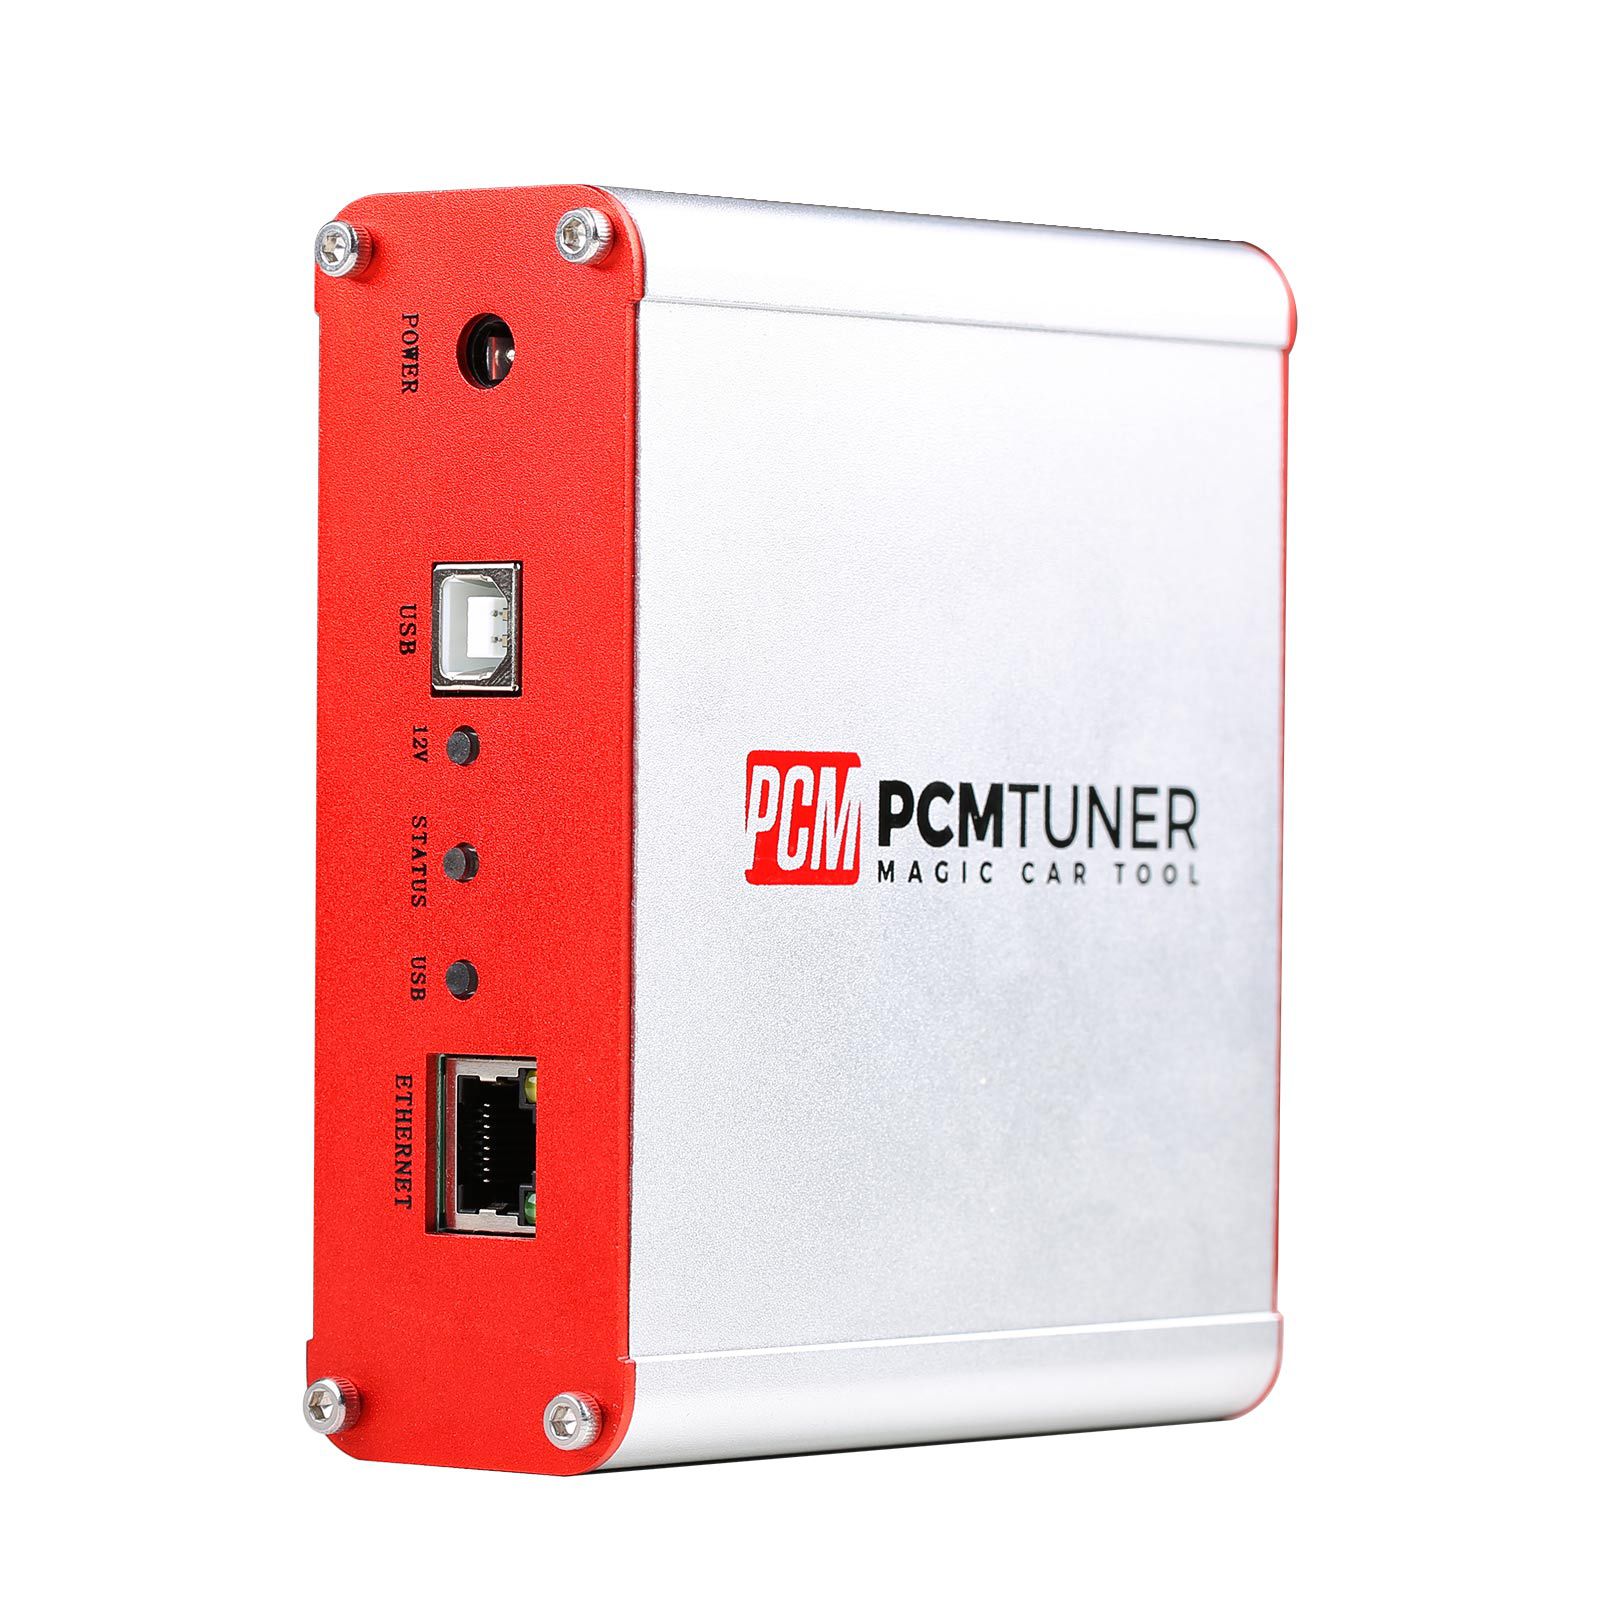 2022 Newest V1.27 PCMtuner ECU Programmer with 67 Modules Free Update Online Support Checksum and Pinout Diagram with Free Damaos